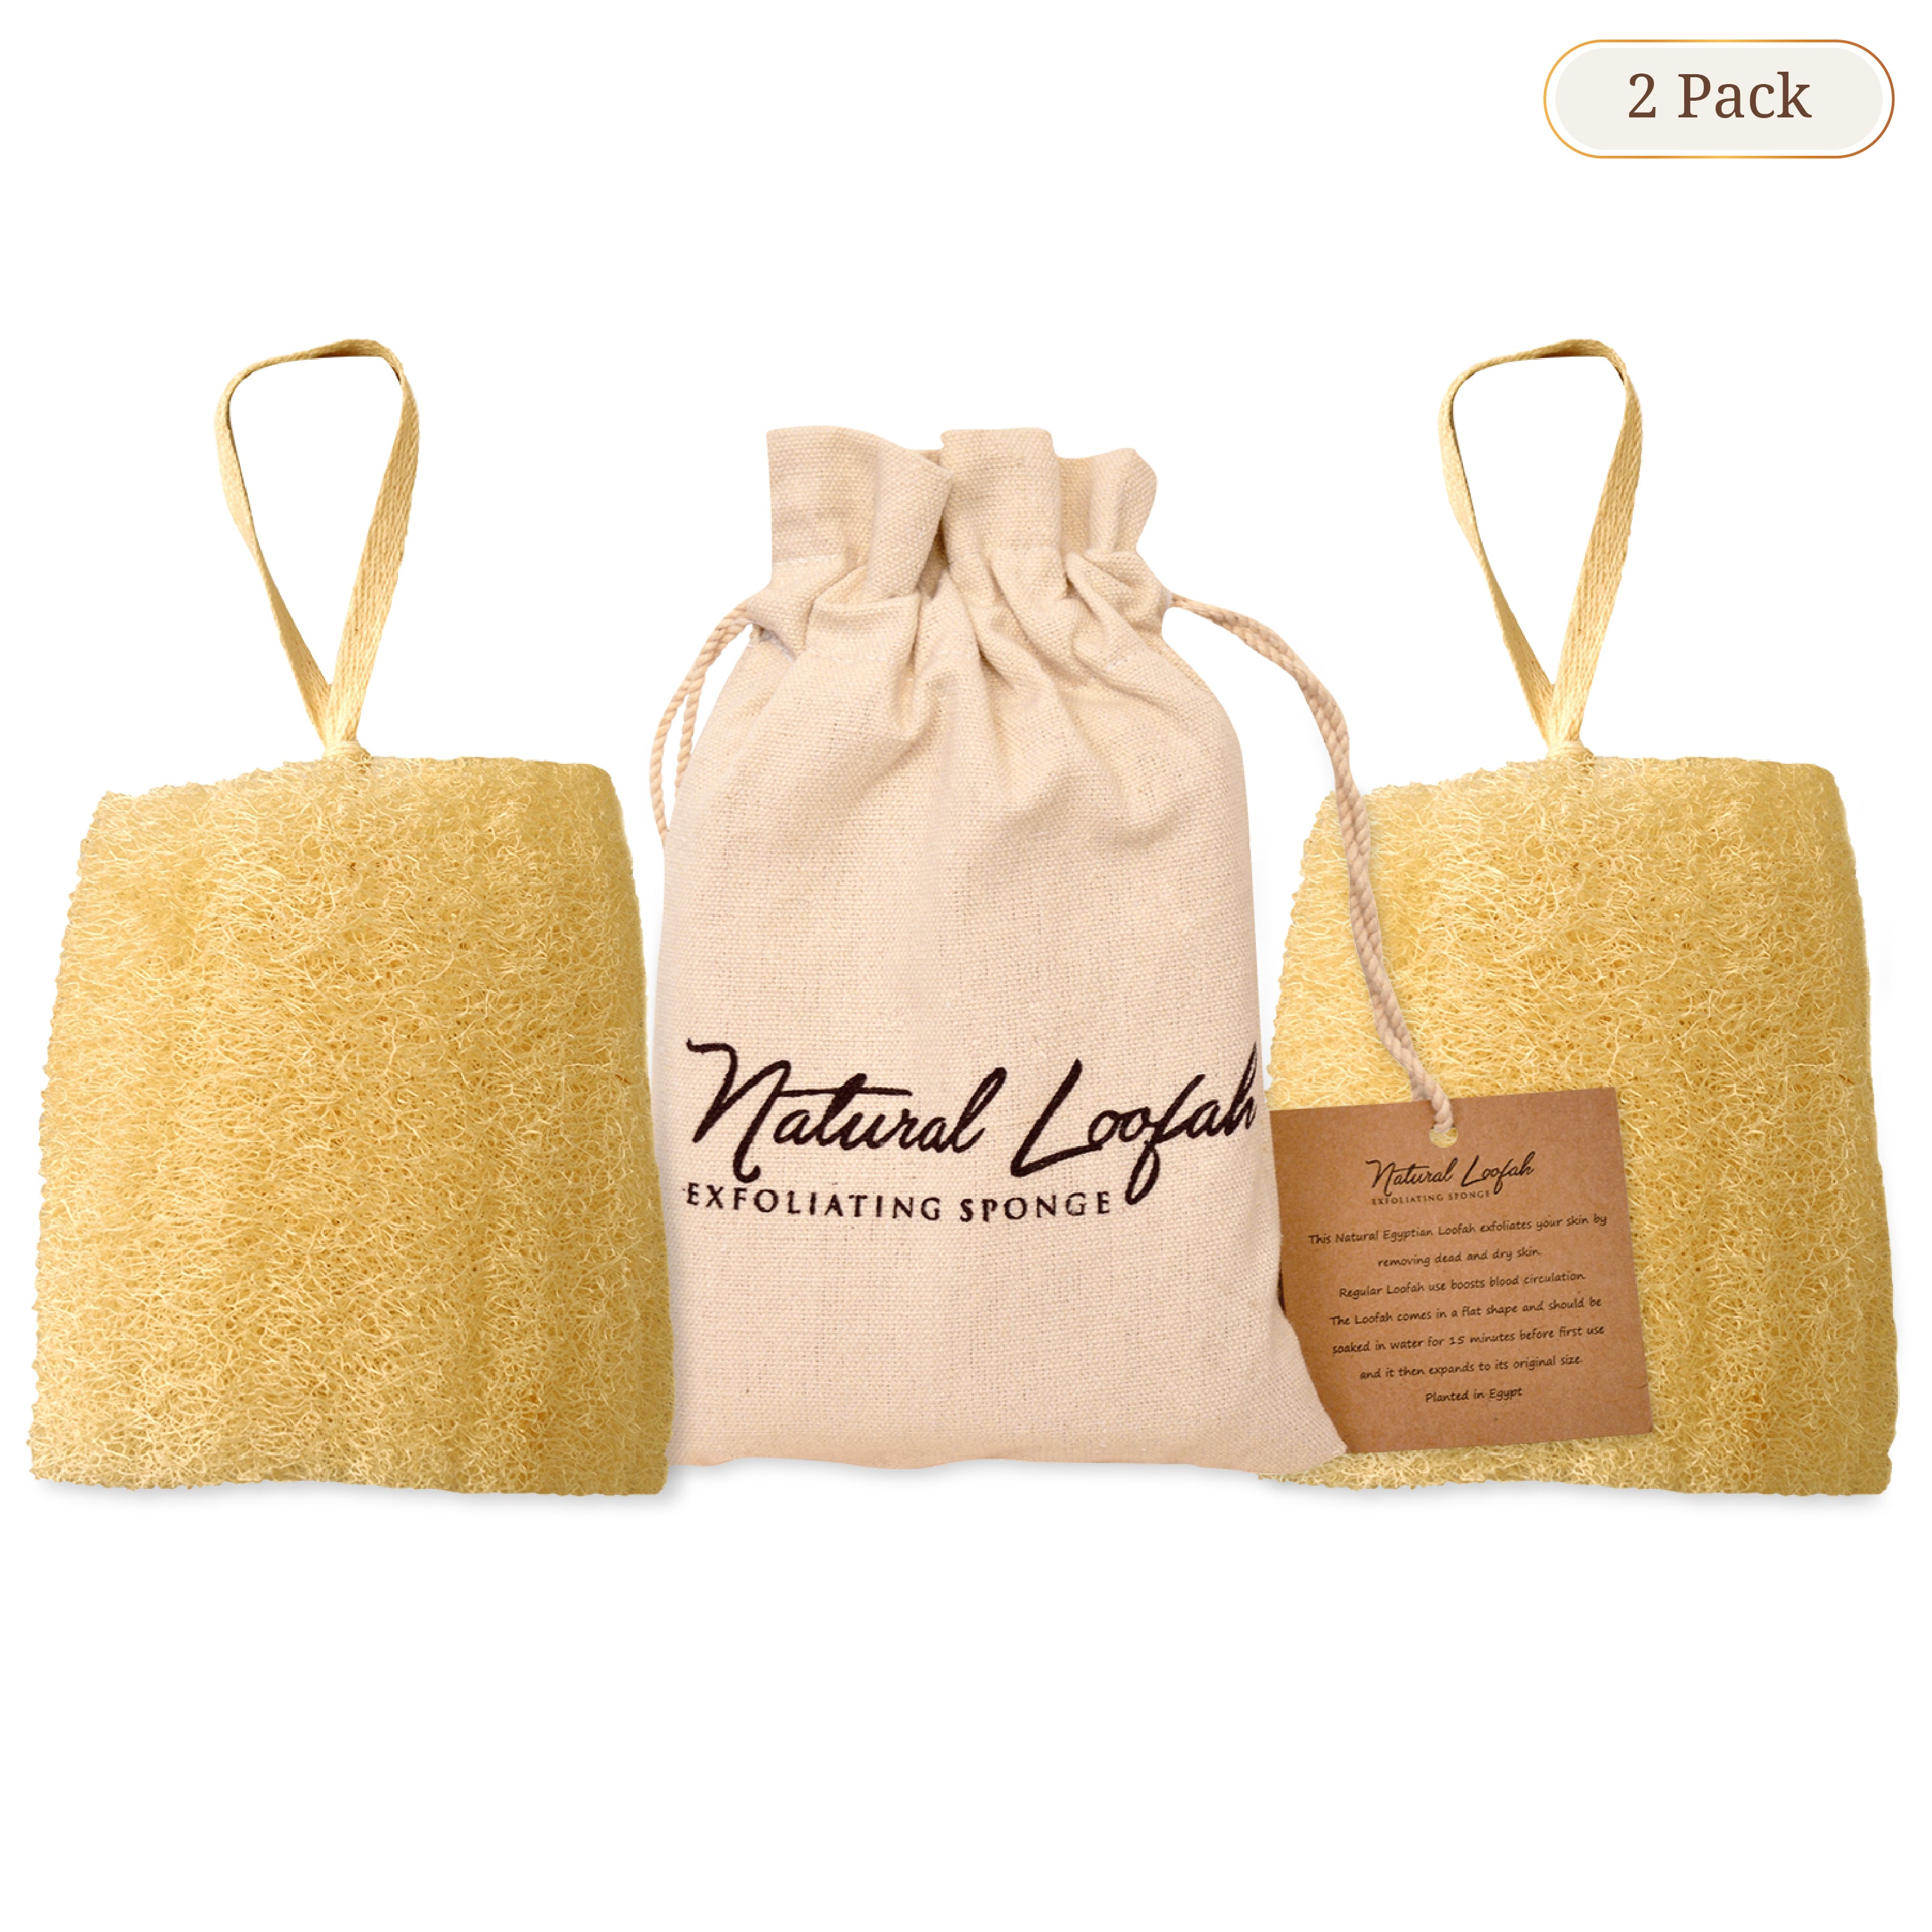 All Natural Loofah Sponge, Set of 3 Real Egyptian Bath & Shower Exfoliating Loofa Scrubber Sponges for Face, Back and Body, Eco Friendly, No Toxic Chemicals, 6" x 6"